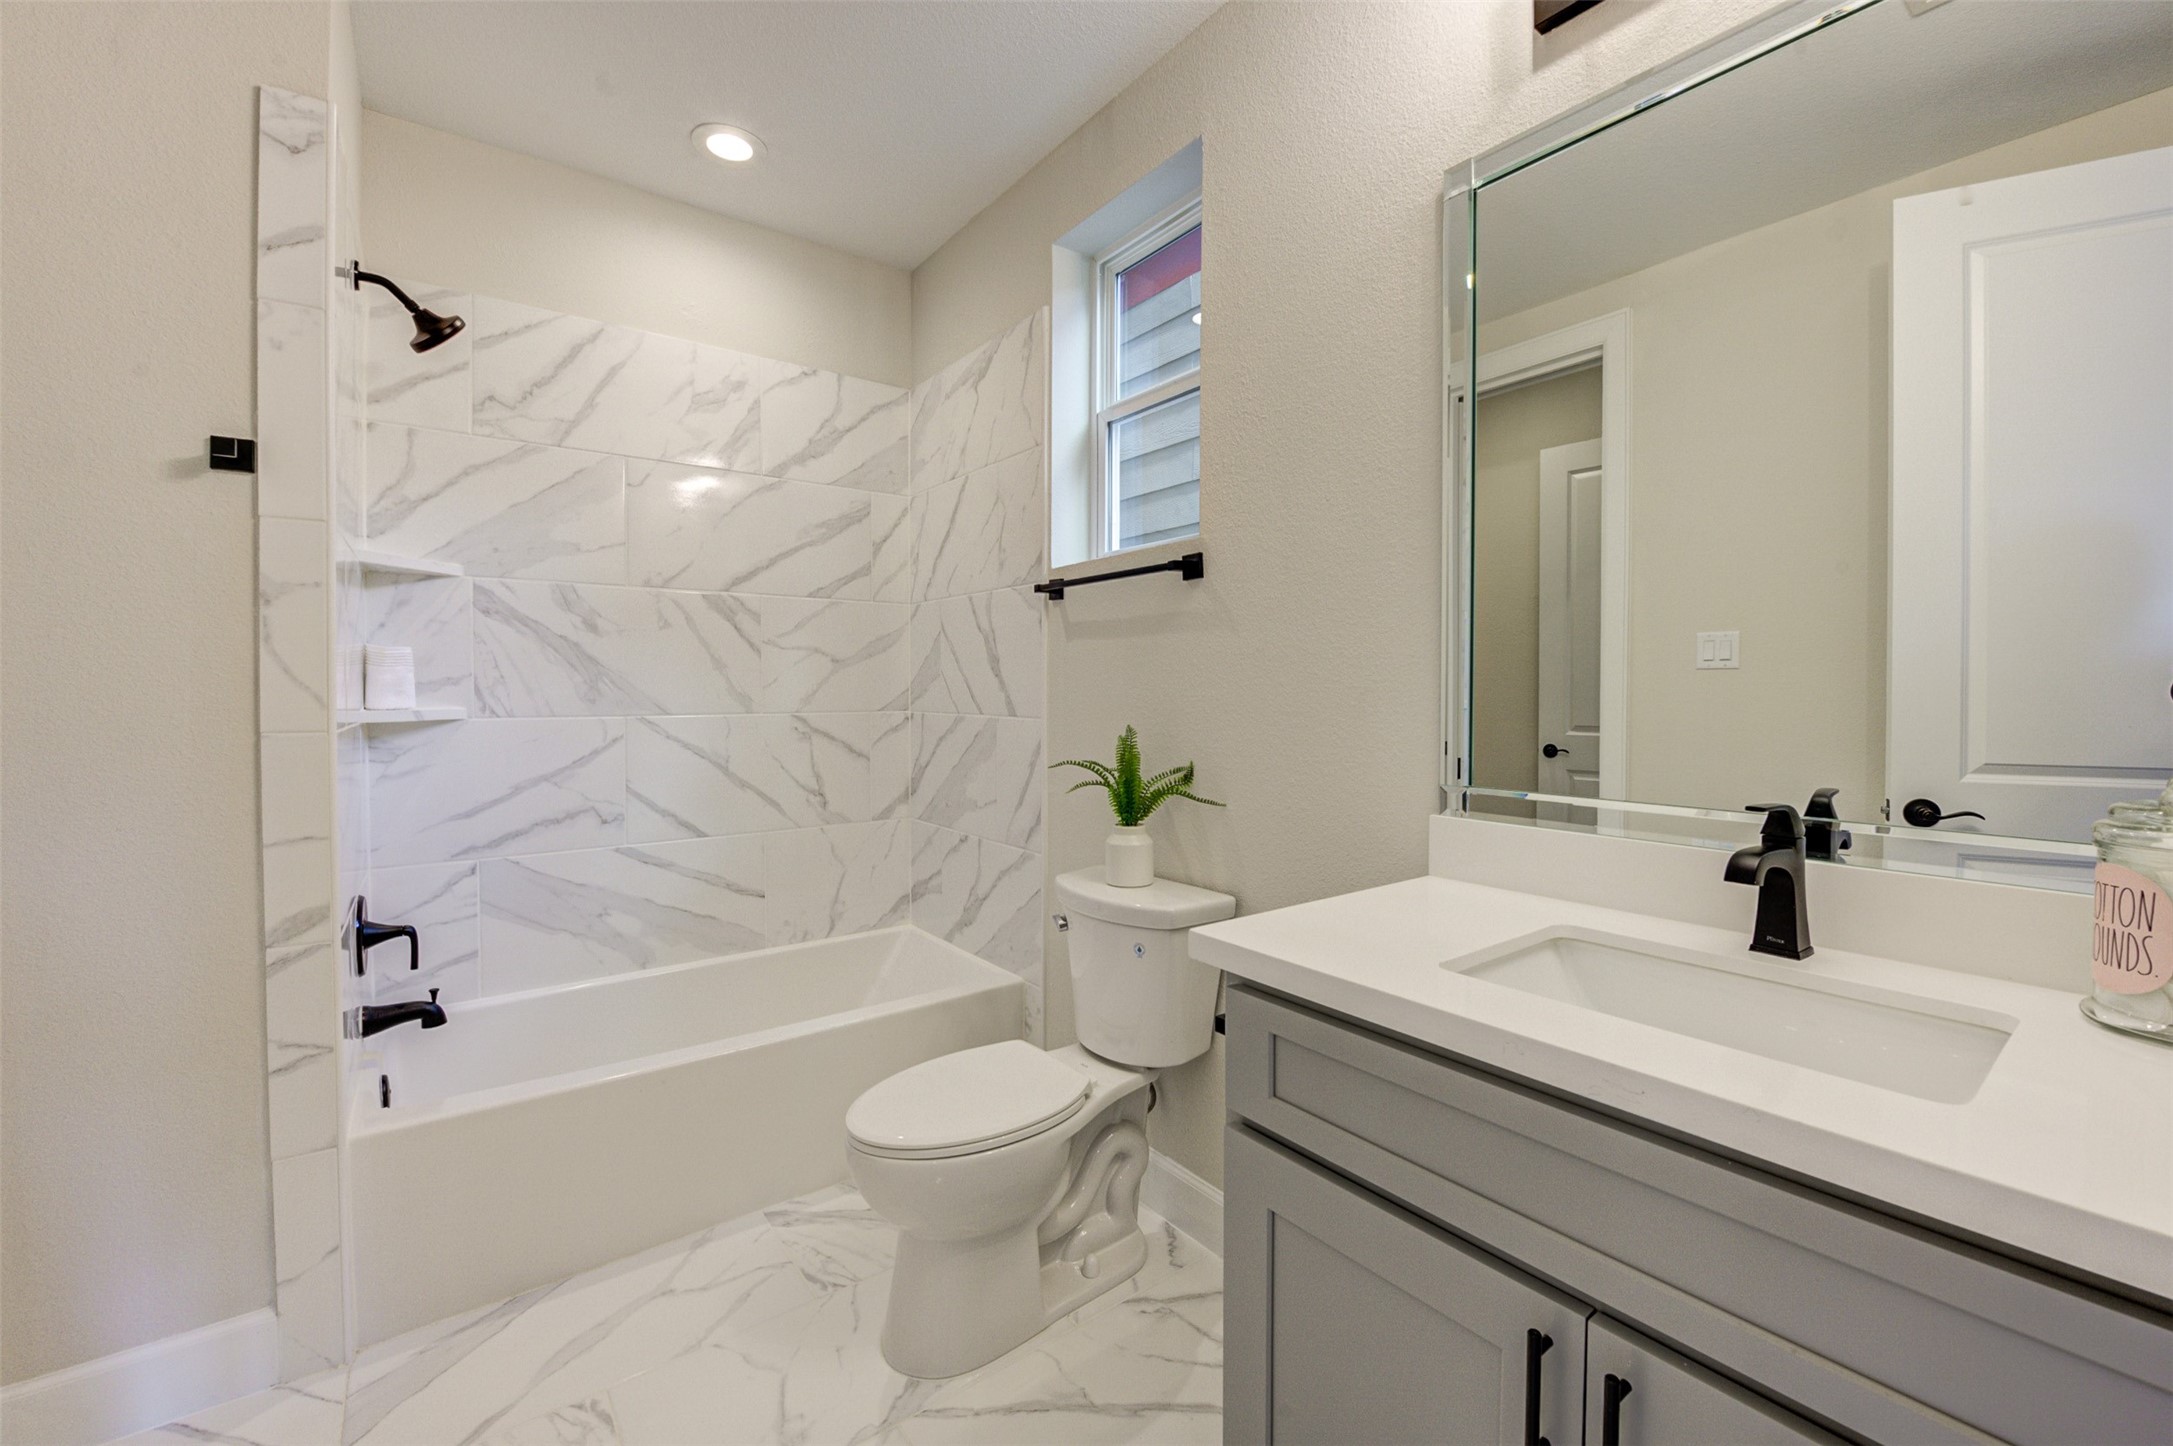 Lovely full bathroom on the first floor with quartz countertop and black hardware.